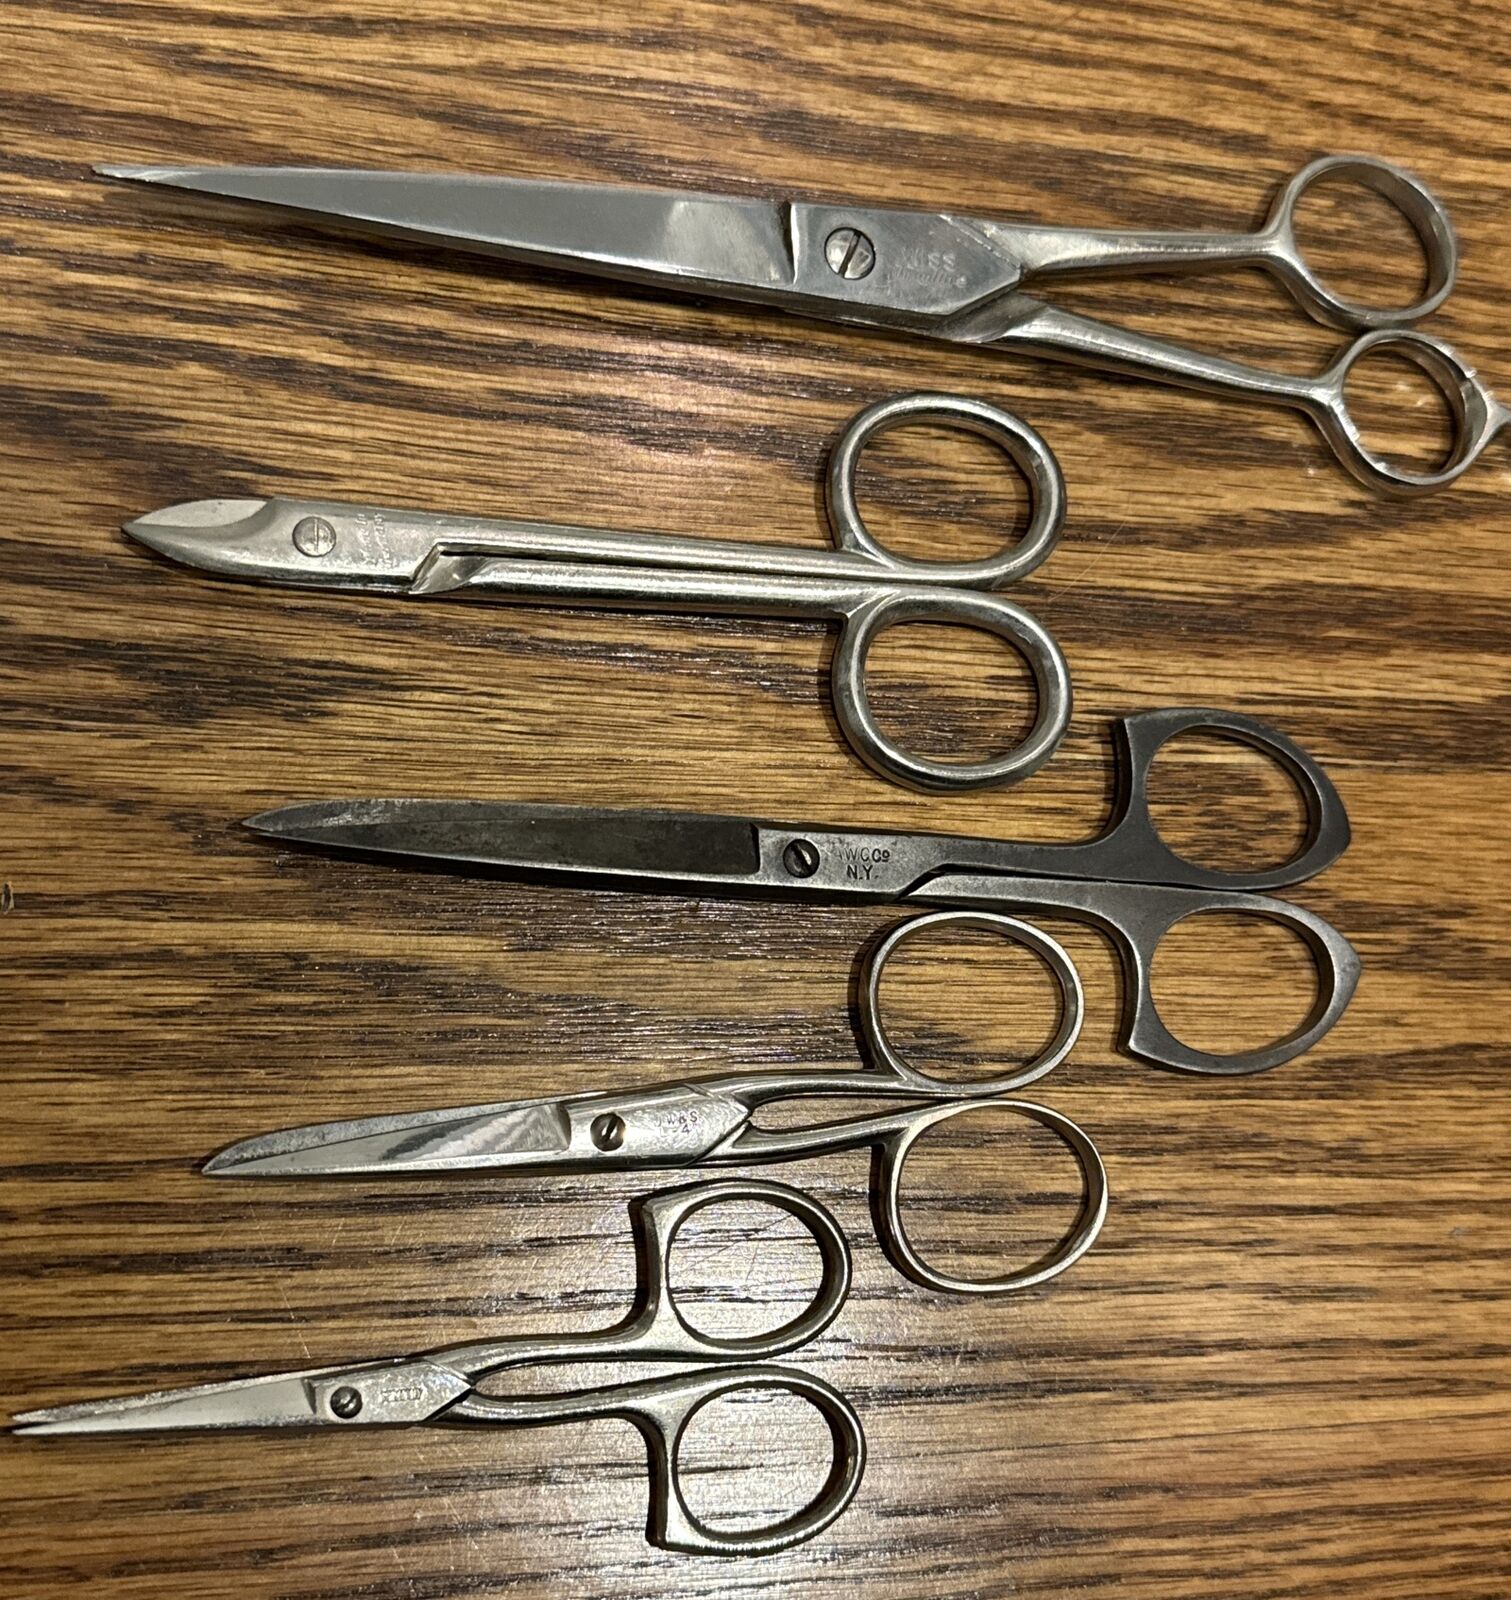 Lot of 5 Vintage Sewing Scissors - Wiss, A.W.C Co. NY, German Unbranded